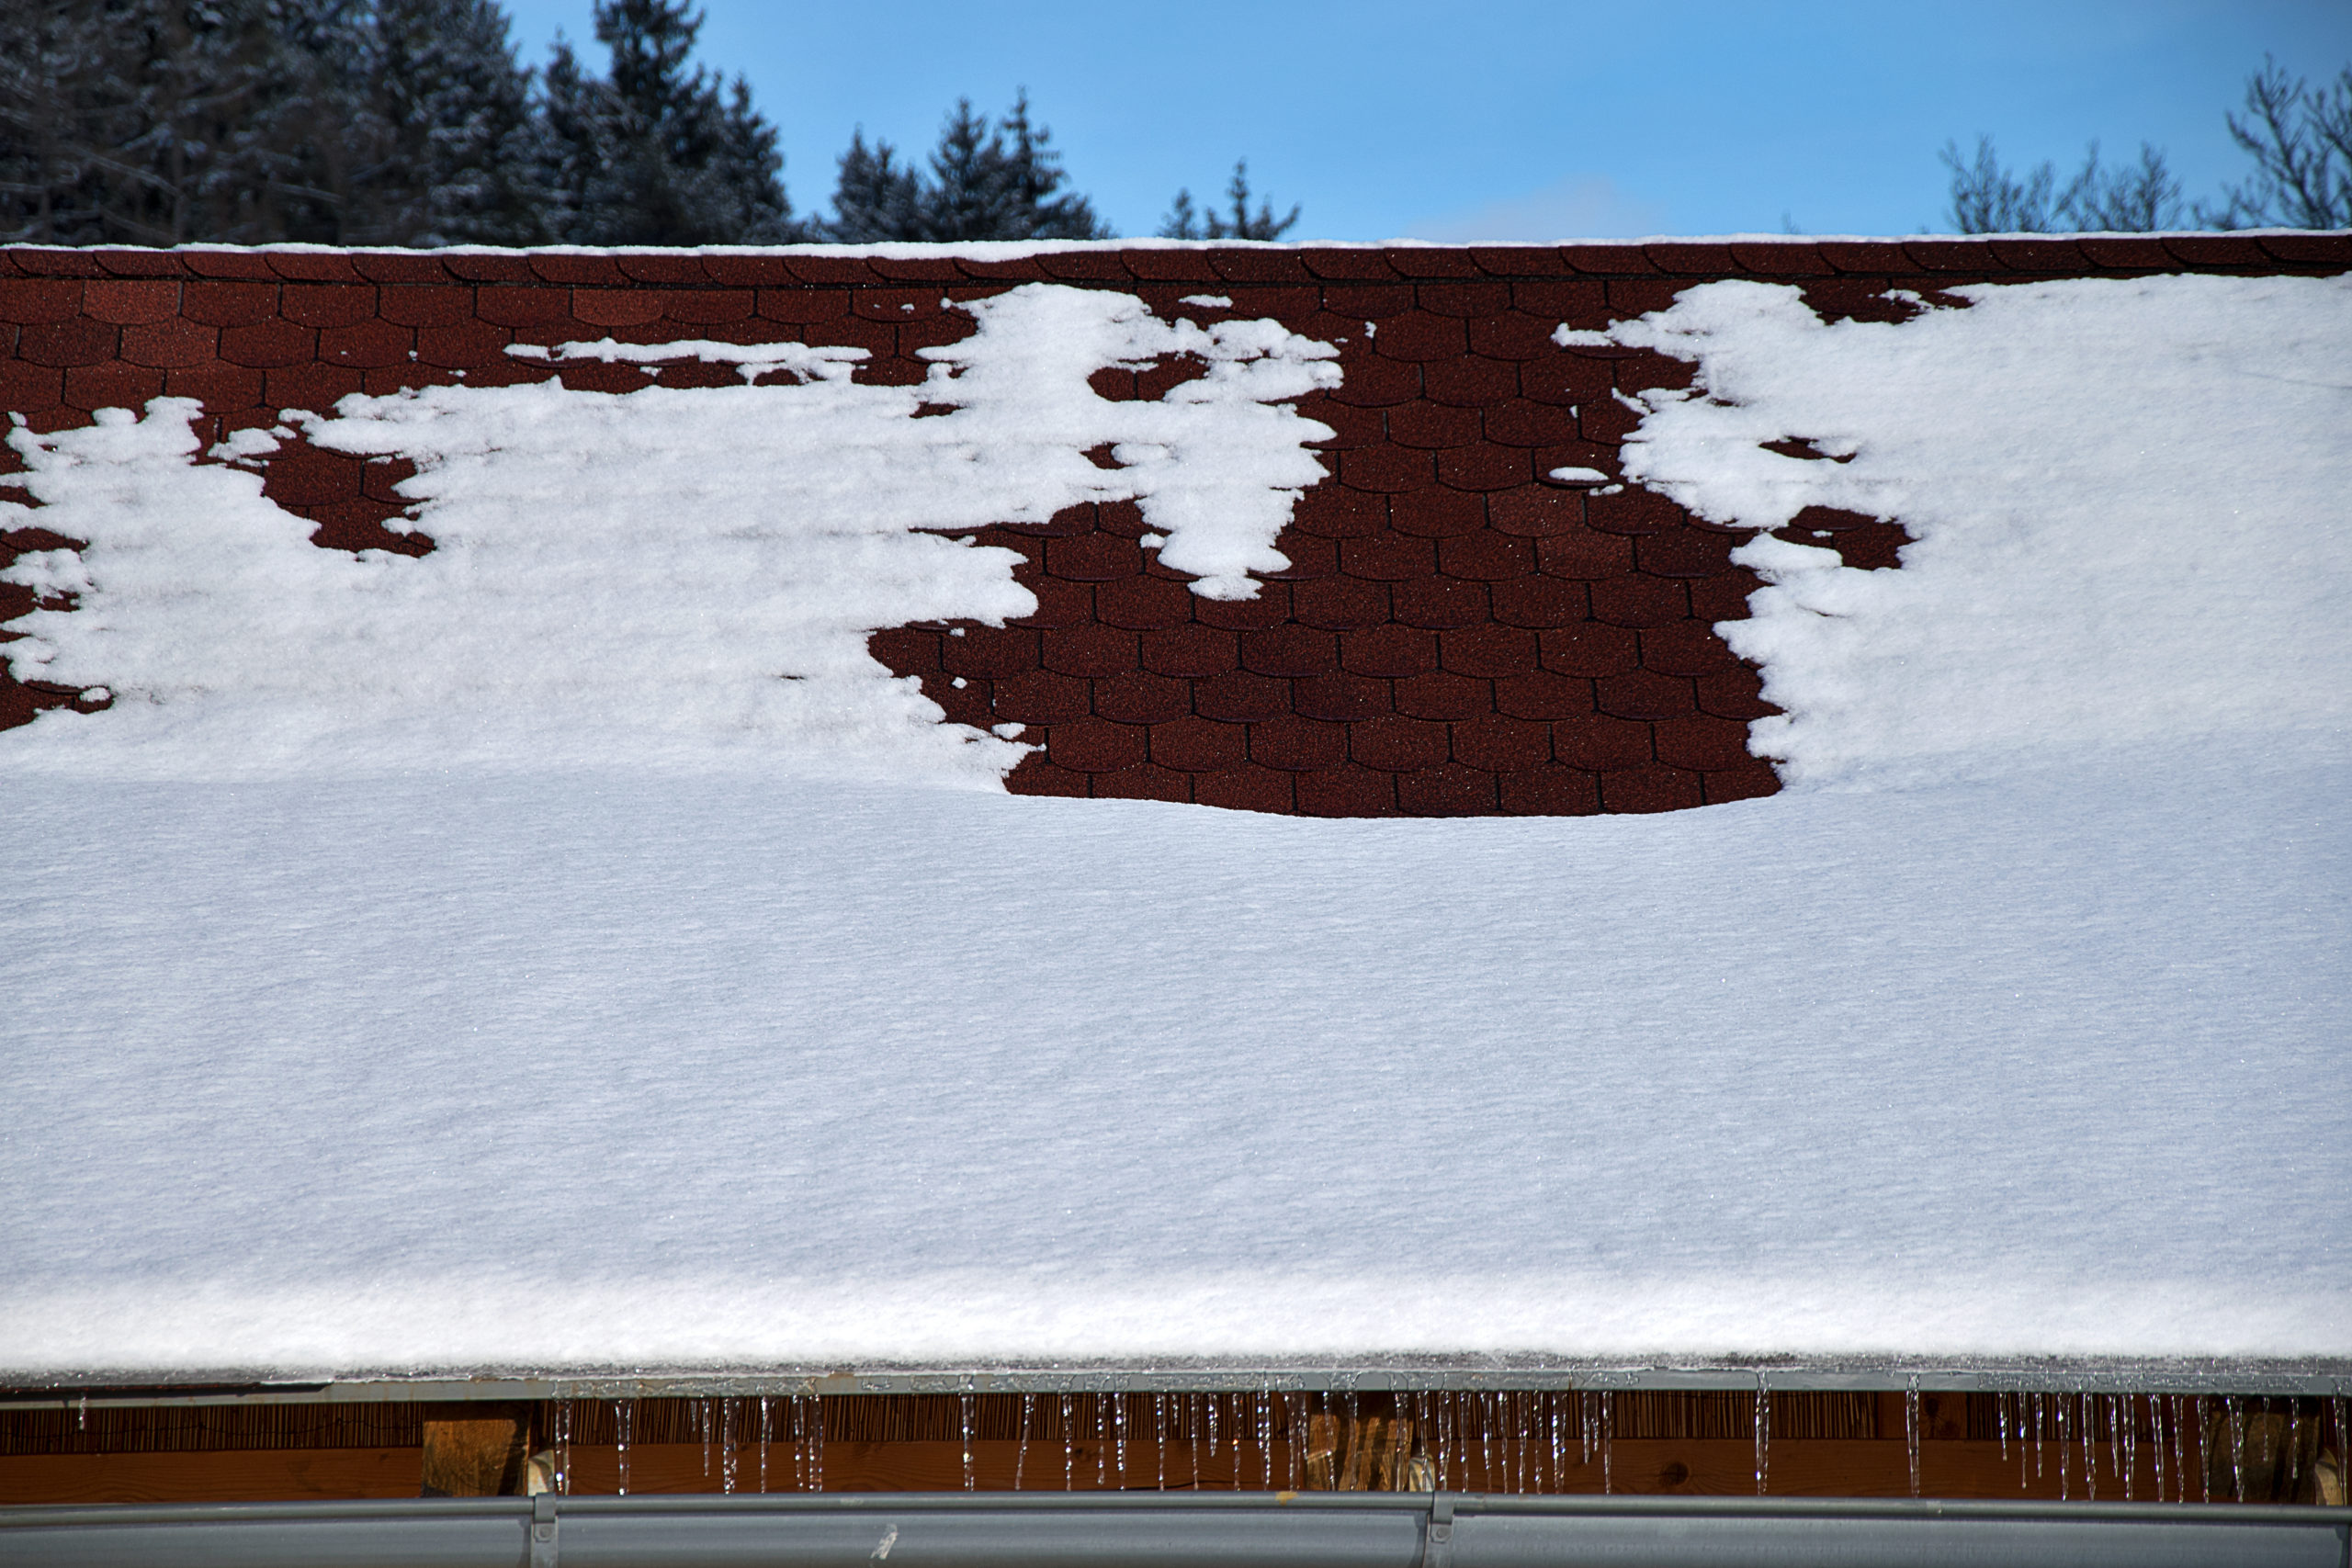 Roof with asphalt shingles covered with snow and icicles.